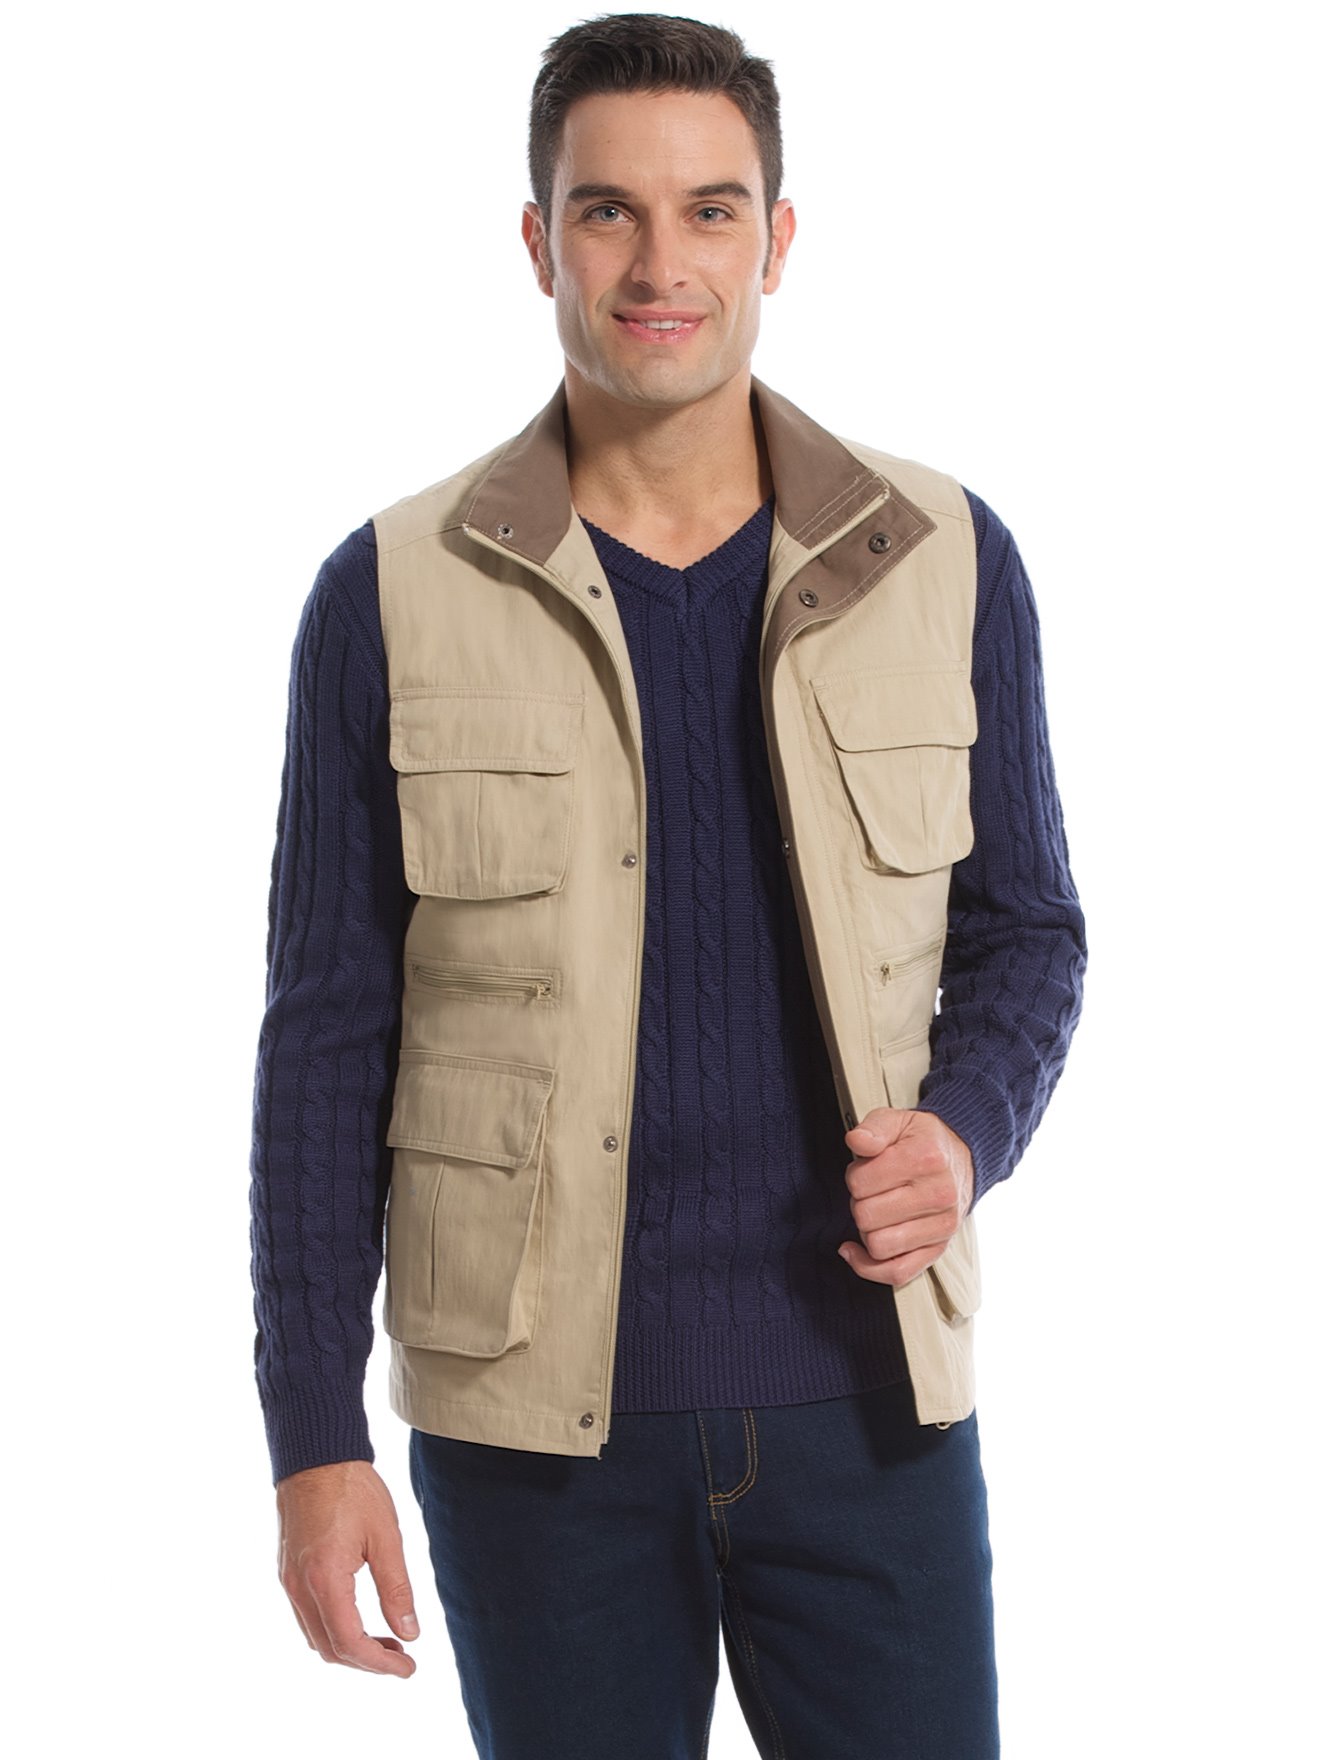  Gilet  Sans  Manche  Homme  Multipoches Grande Taille 